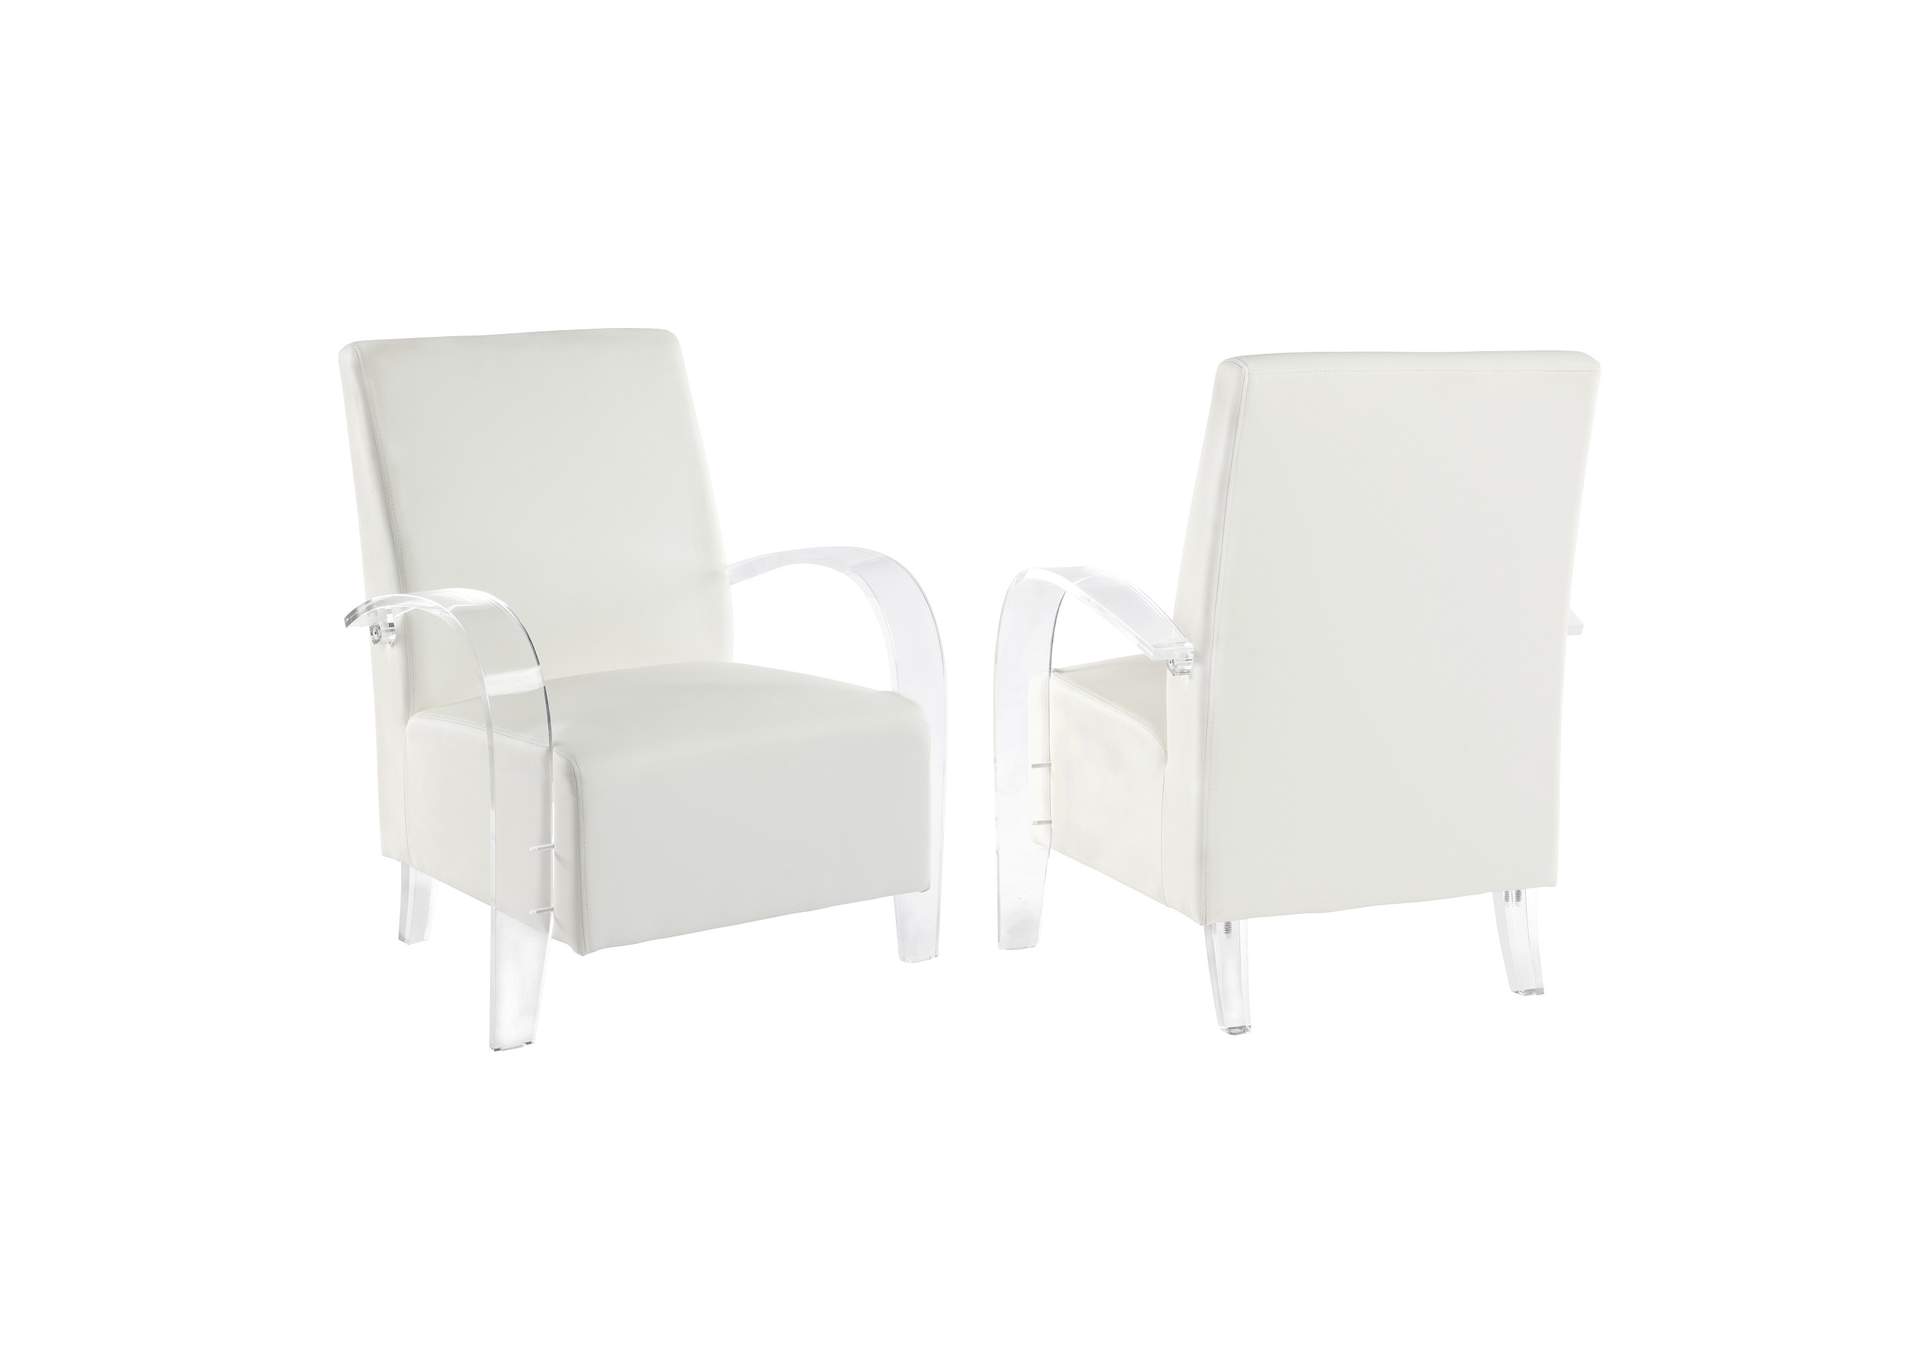 Solid Acrylic Accent Chair With Pvc Upholstery,Chintaly Imports